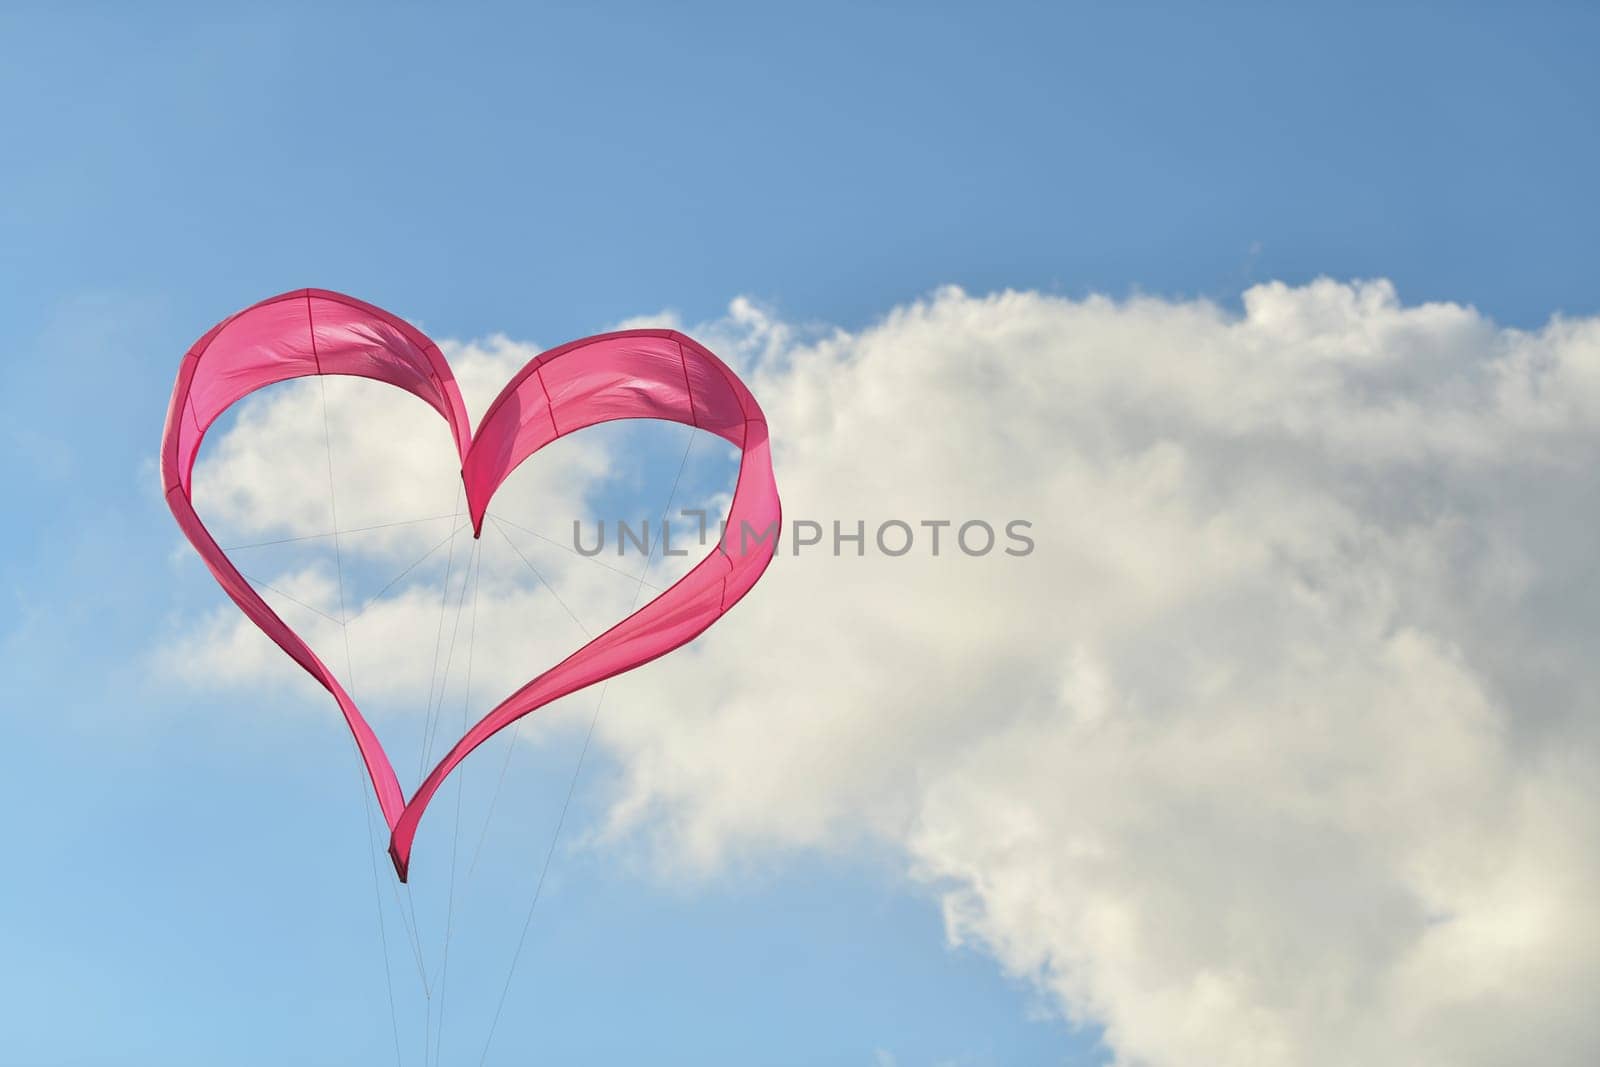 Pink heart kite is flying in the sky